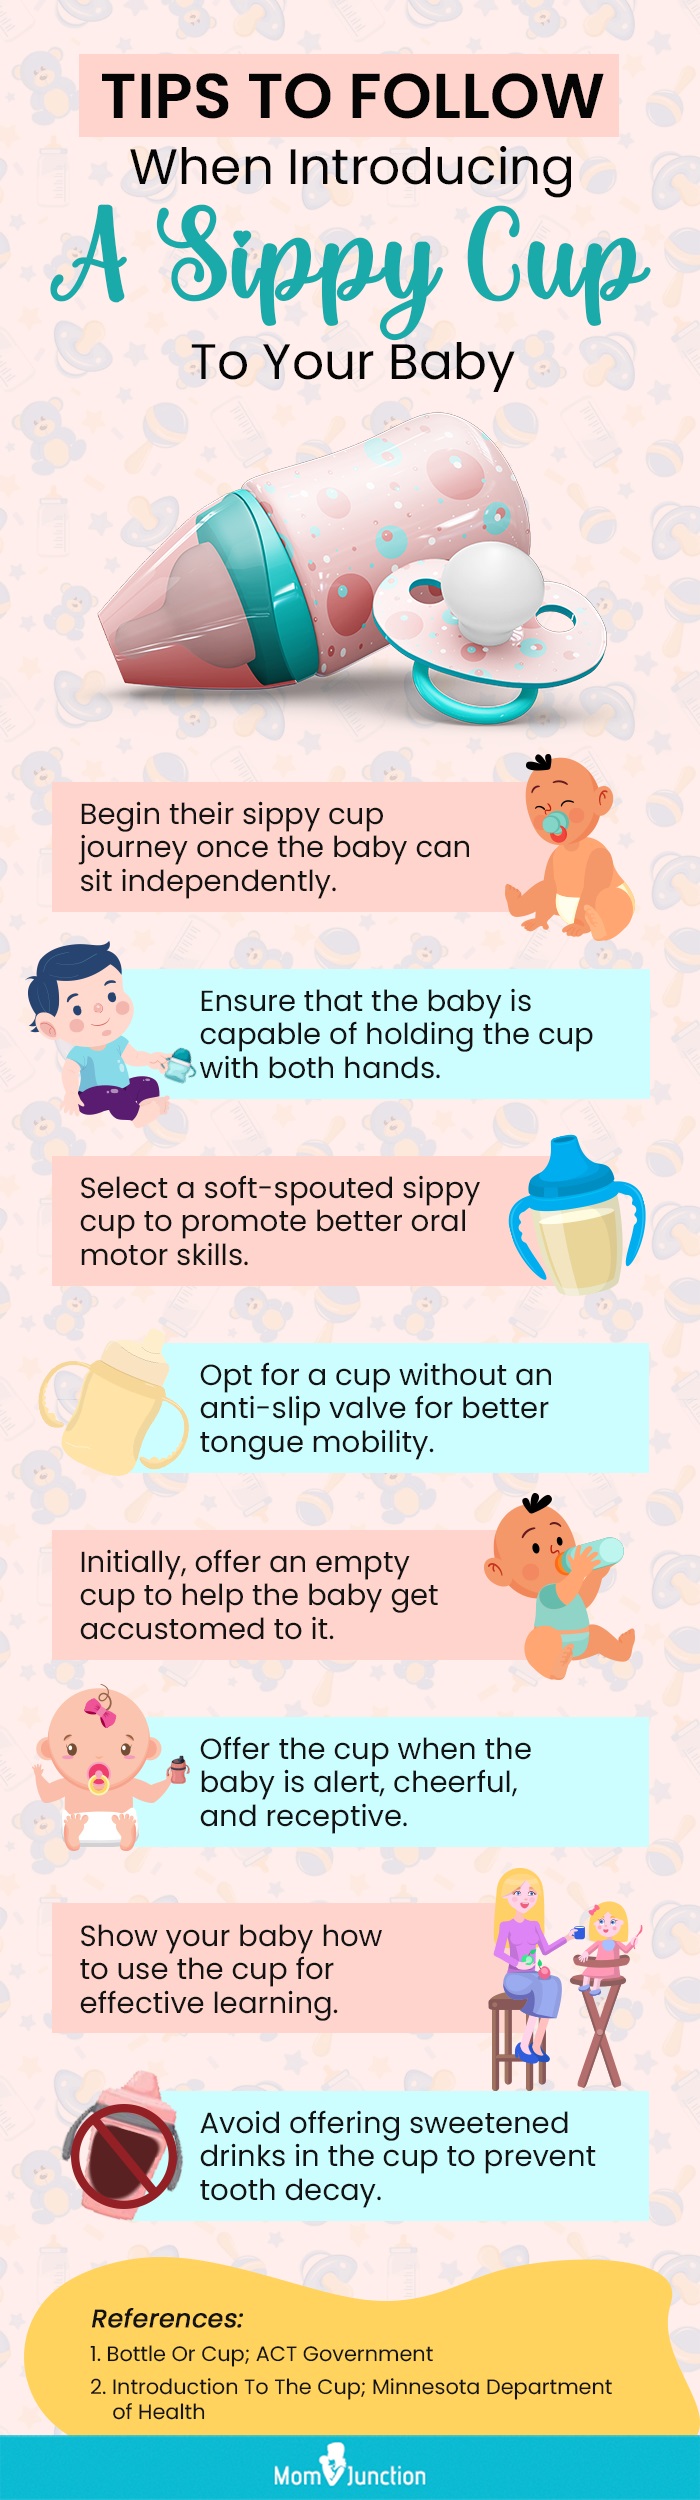 https://cdn2.momjunction.com/wp-content/uploads/2023/06/Tips-To-Follow-When-Introducing-A-Sippy-Cup-To-Your-Baby.jpg